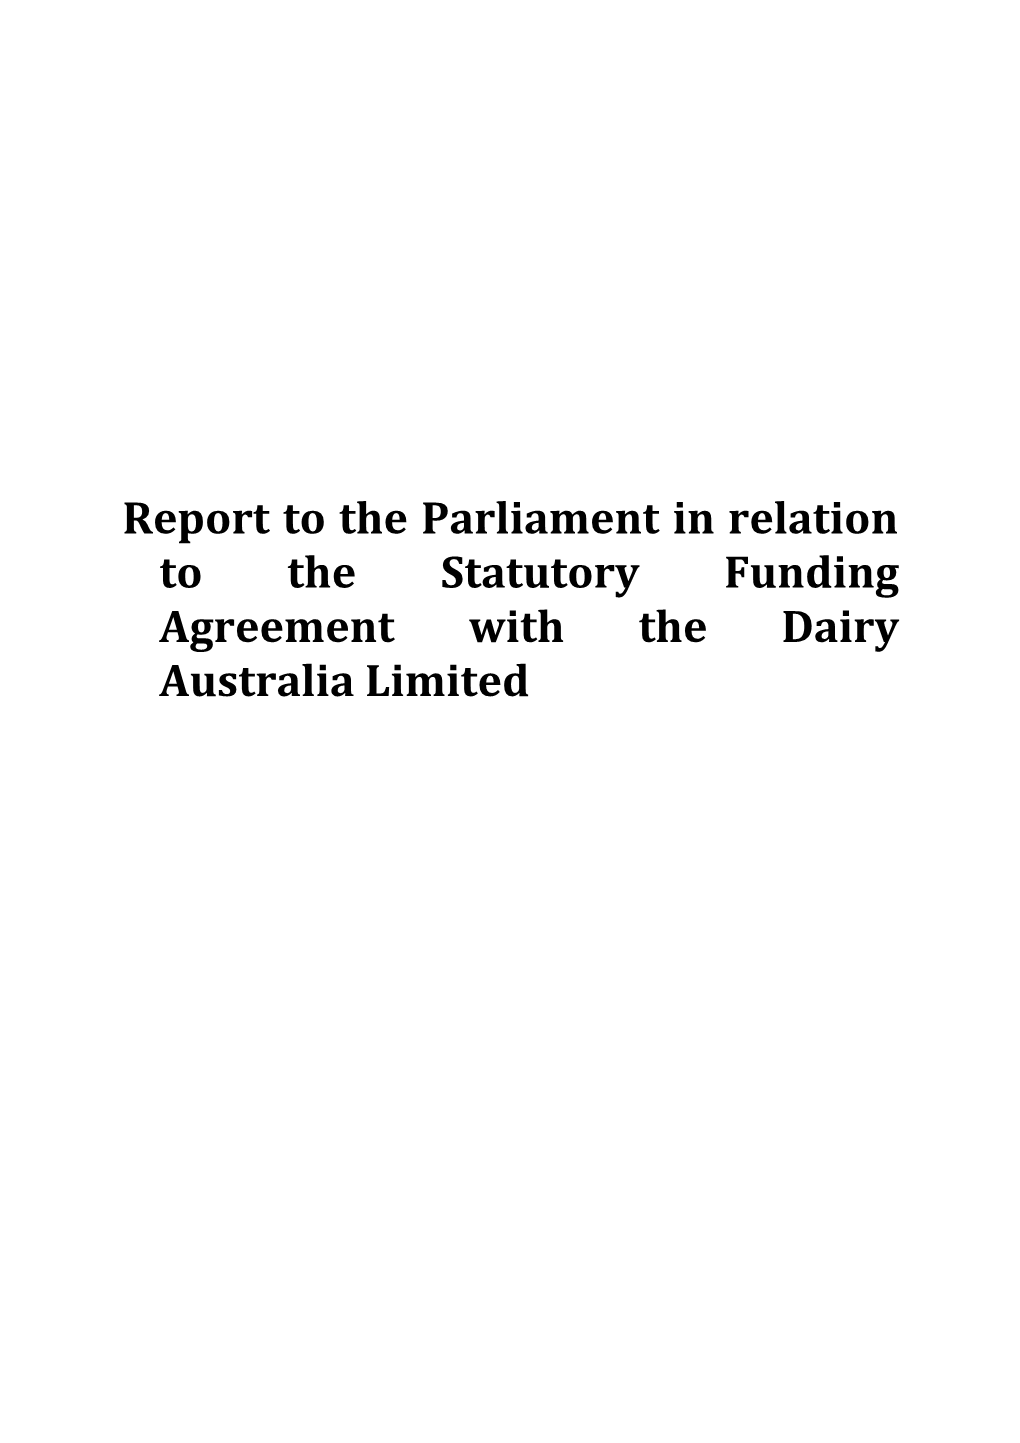 Report to the Parliament in Relation to the Statutory Funding Agreement with Dairy Limited